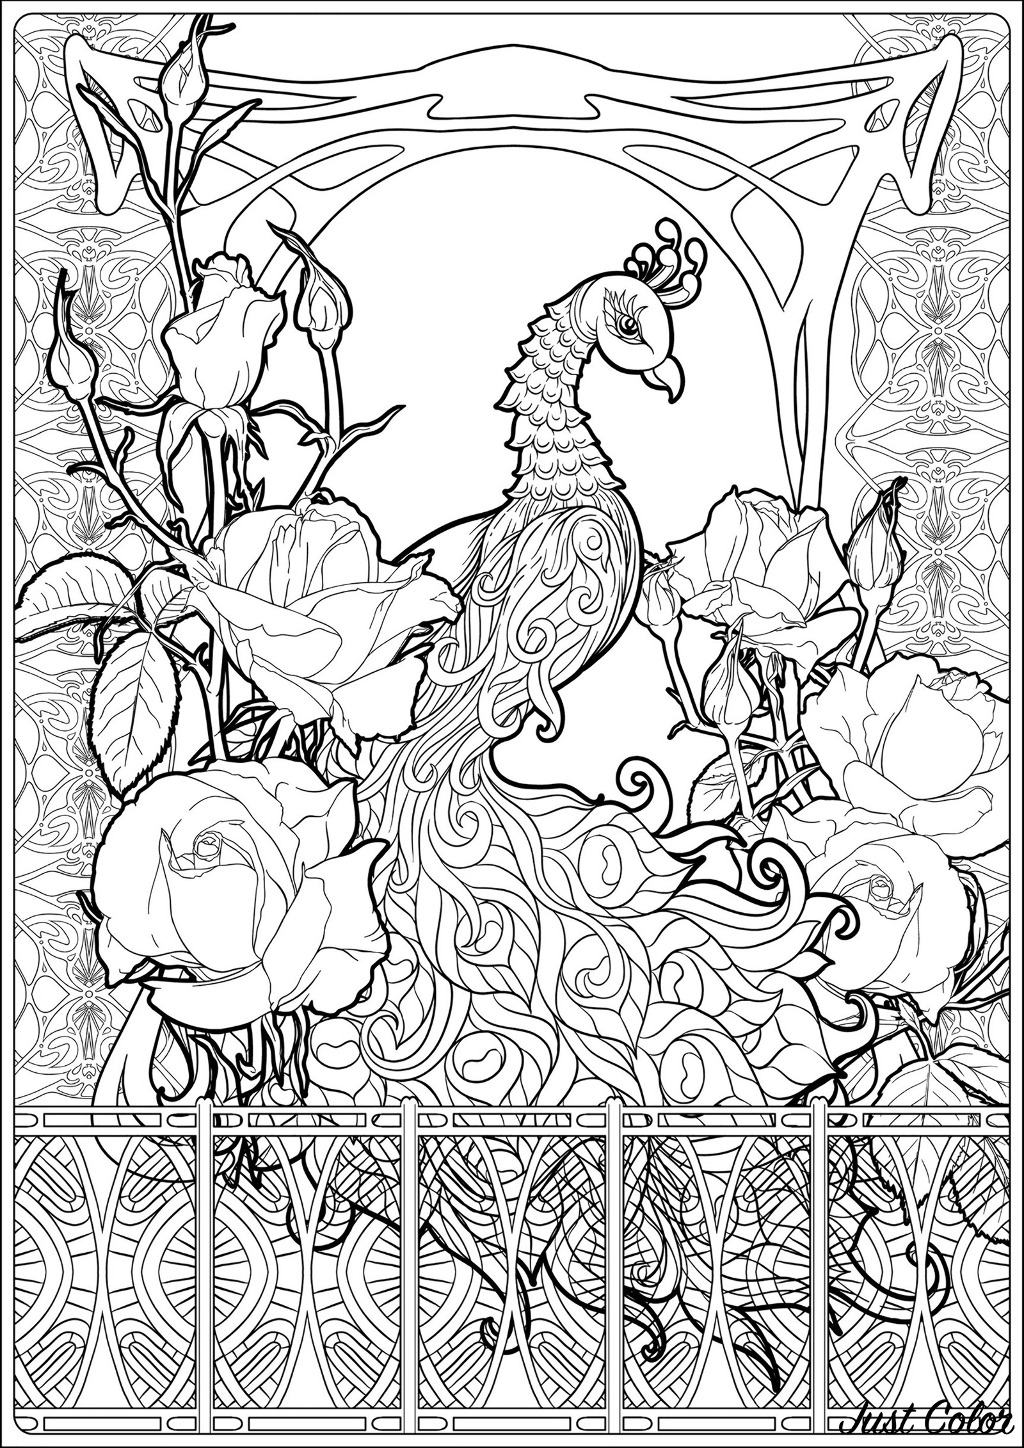 Coloring page of a peacock, with many graphic elements related to Art Nouveau and pretty roses